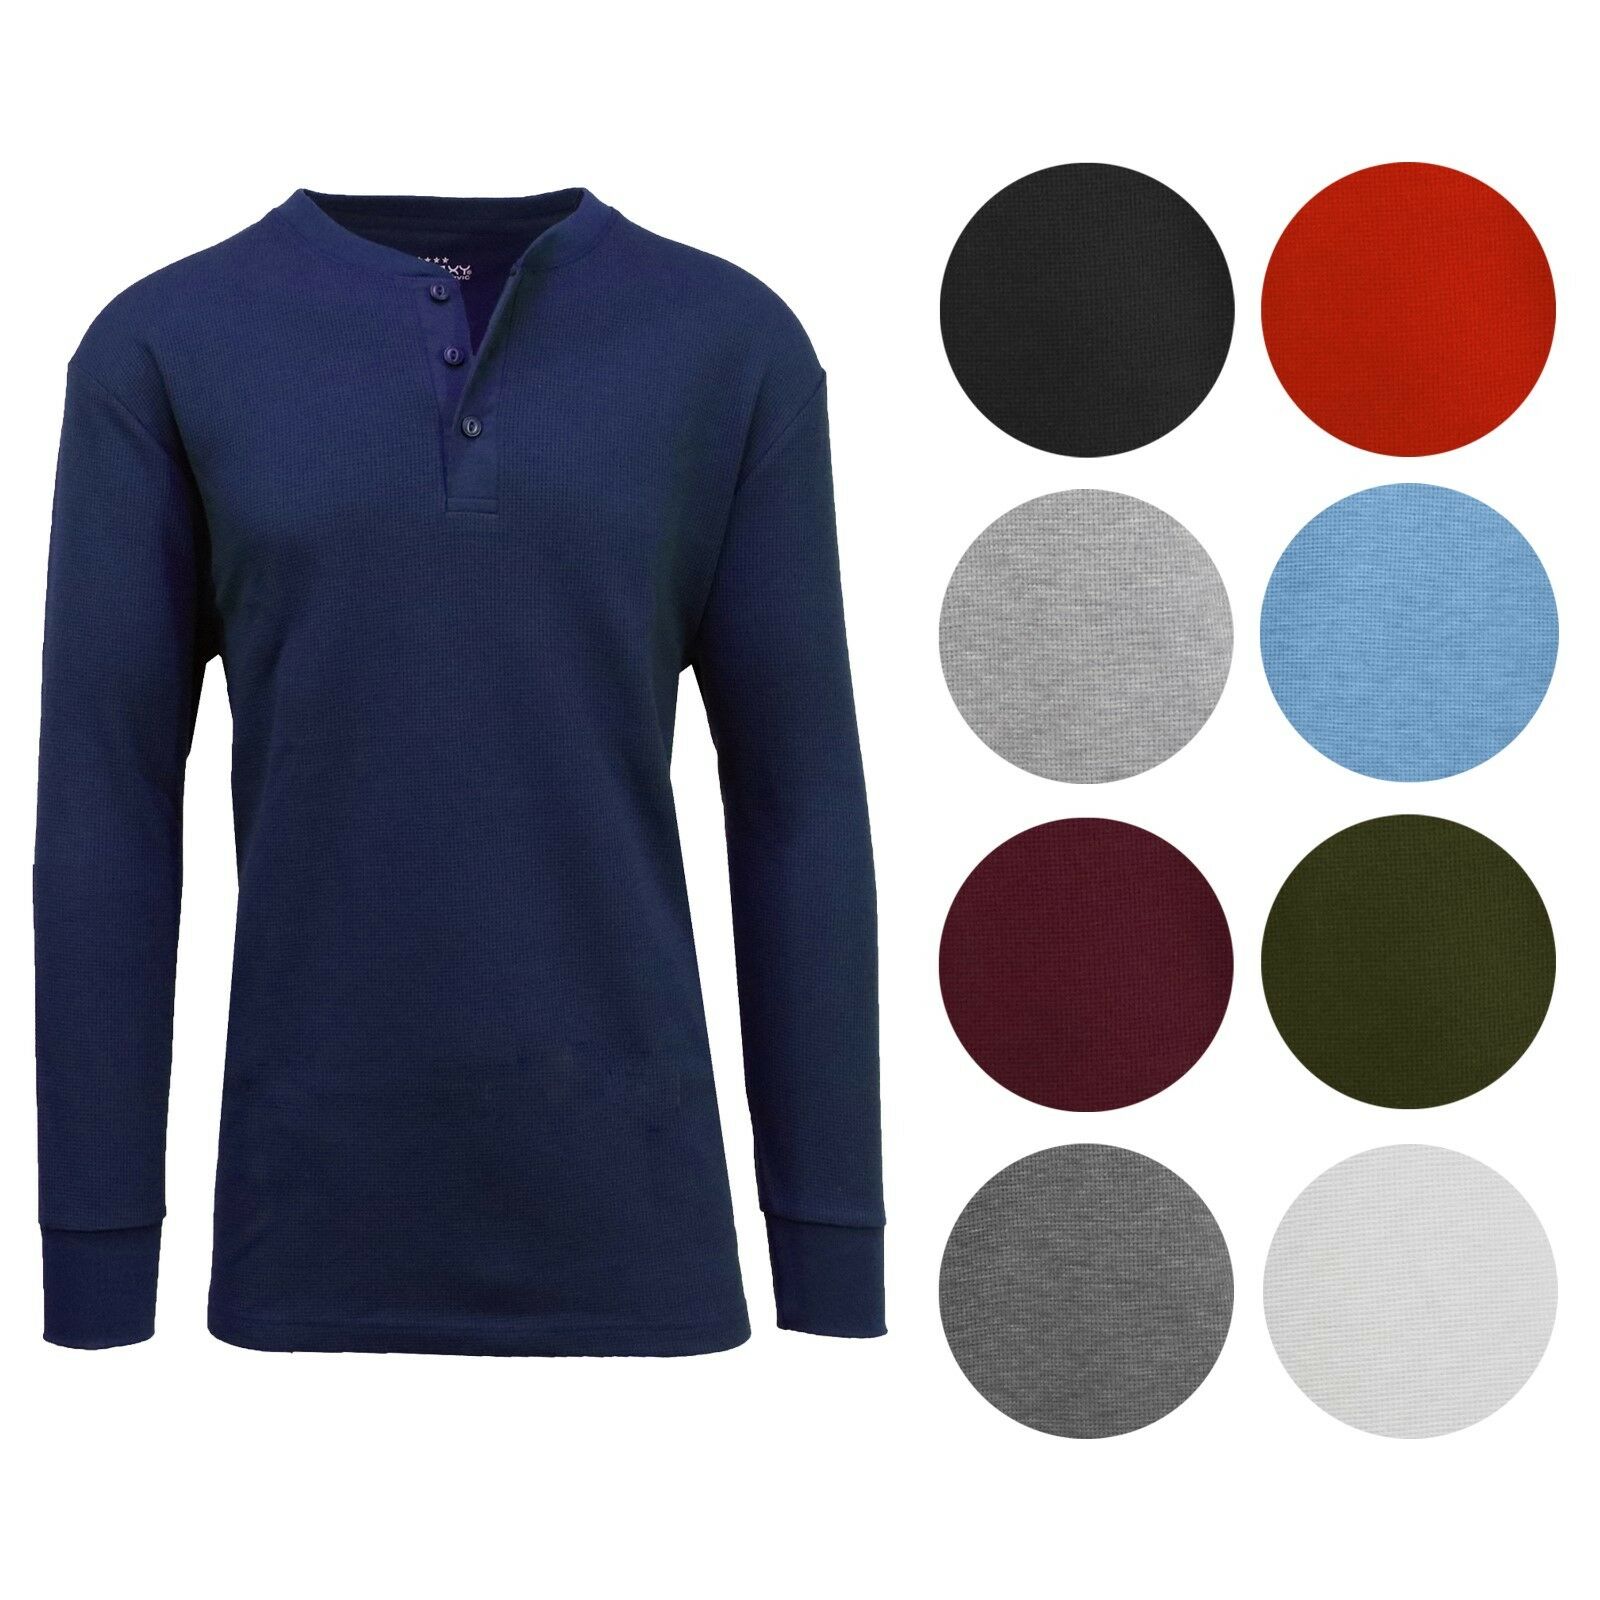 Men's Long Sleeve 3 Button Henley & Classic Waffle Knit Thermal Undershirt Tee